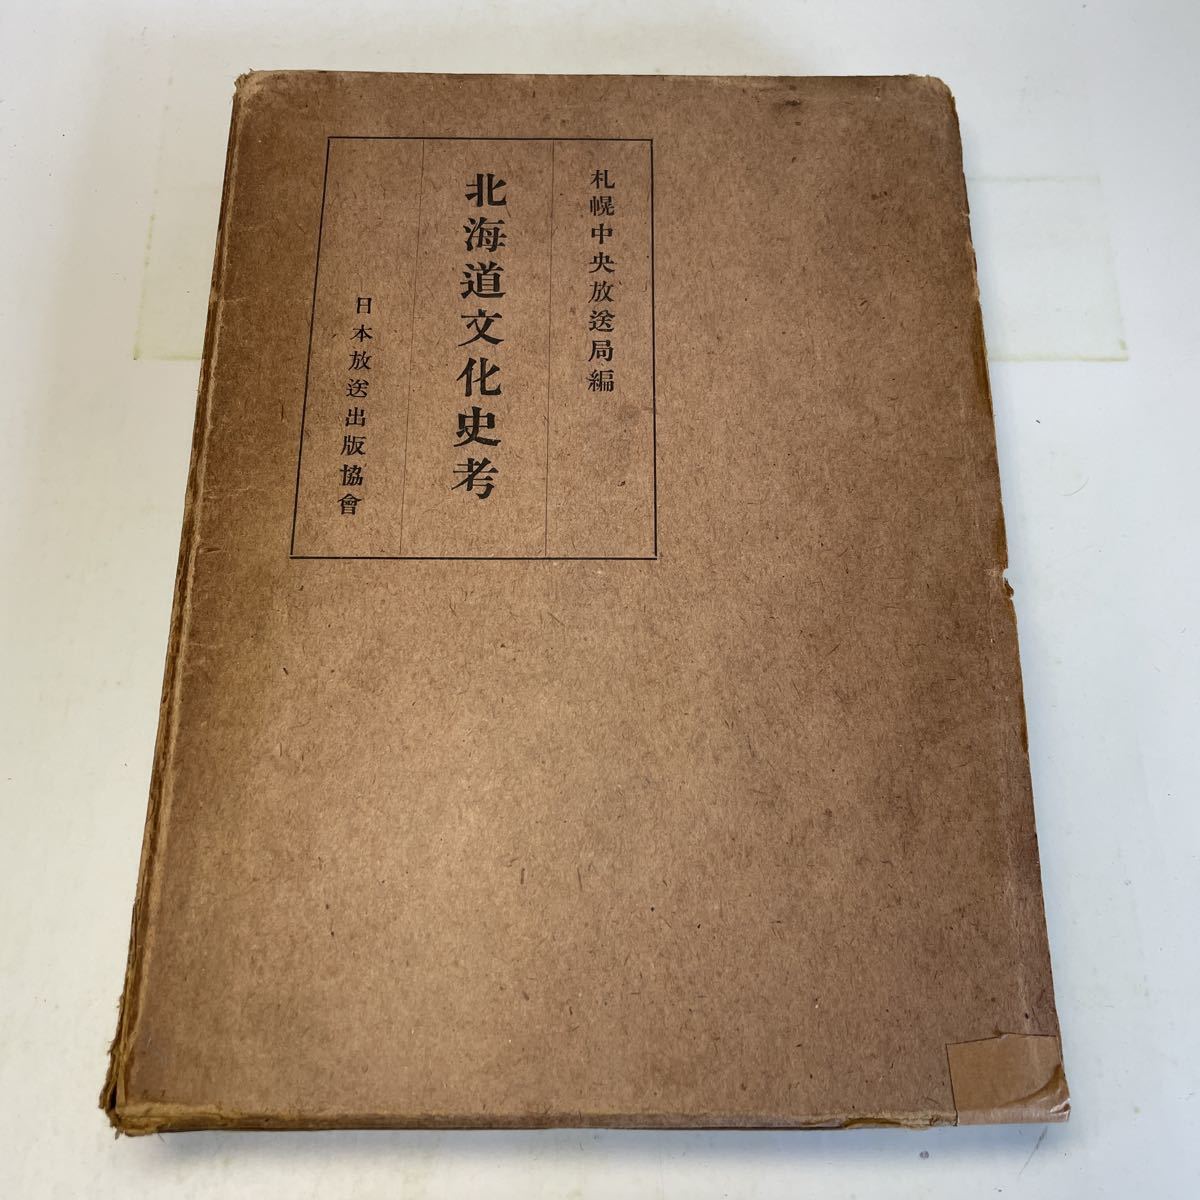 220614!N07! free shipping * old book * Hokkaido culture history . Sapporo centre broadcast department compilation Japan broadcast publish association Showa era 17 year * history ... earth history a dog culture NHK